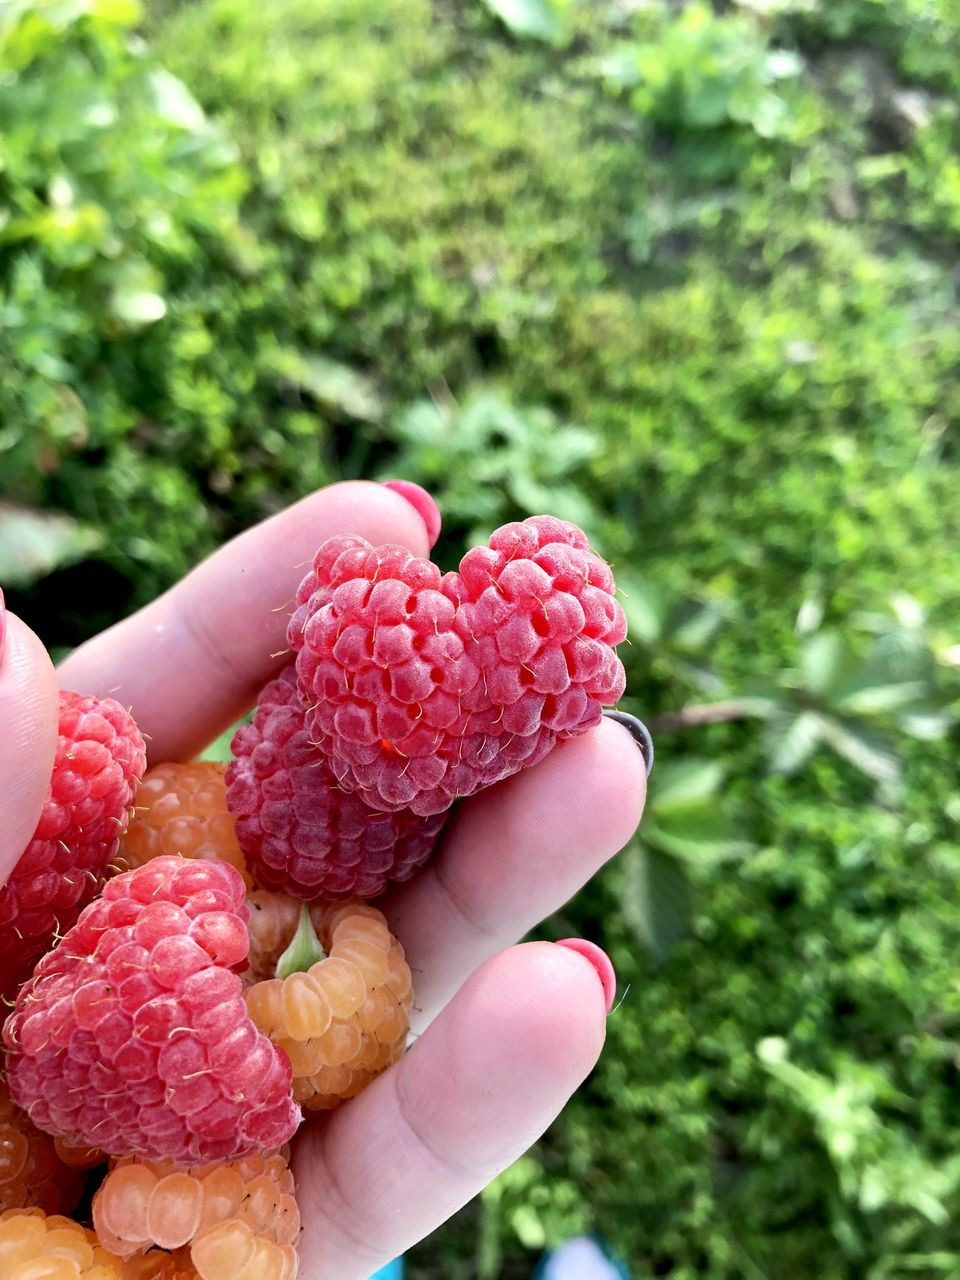 CLOSE-UP OF HAND HOLDING BERRIES